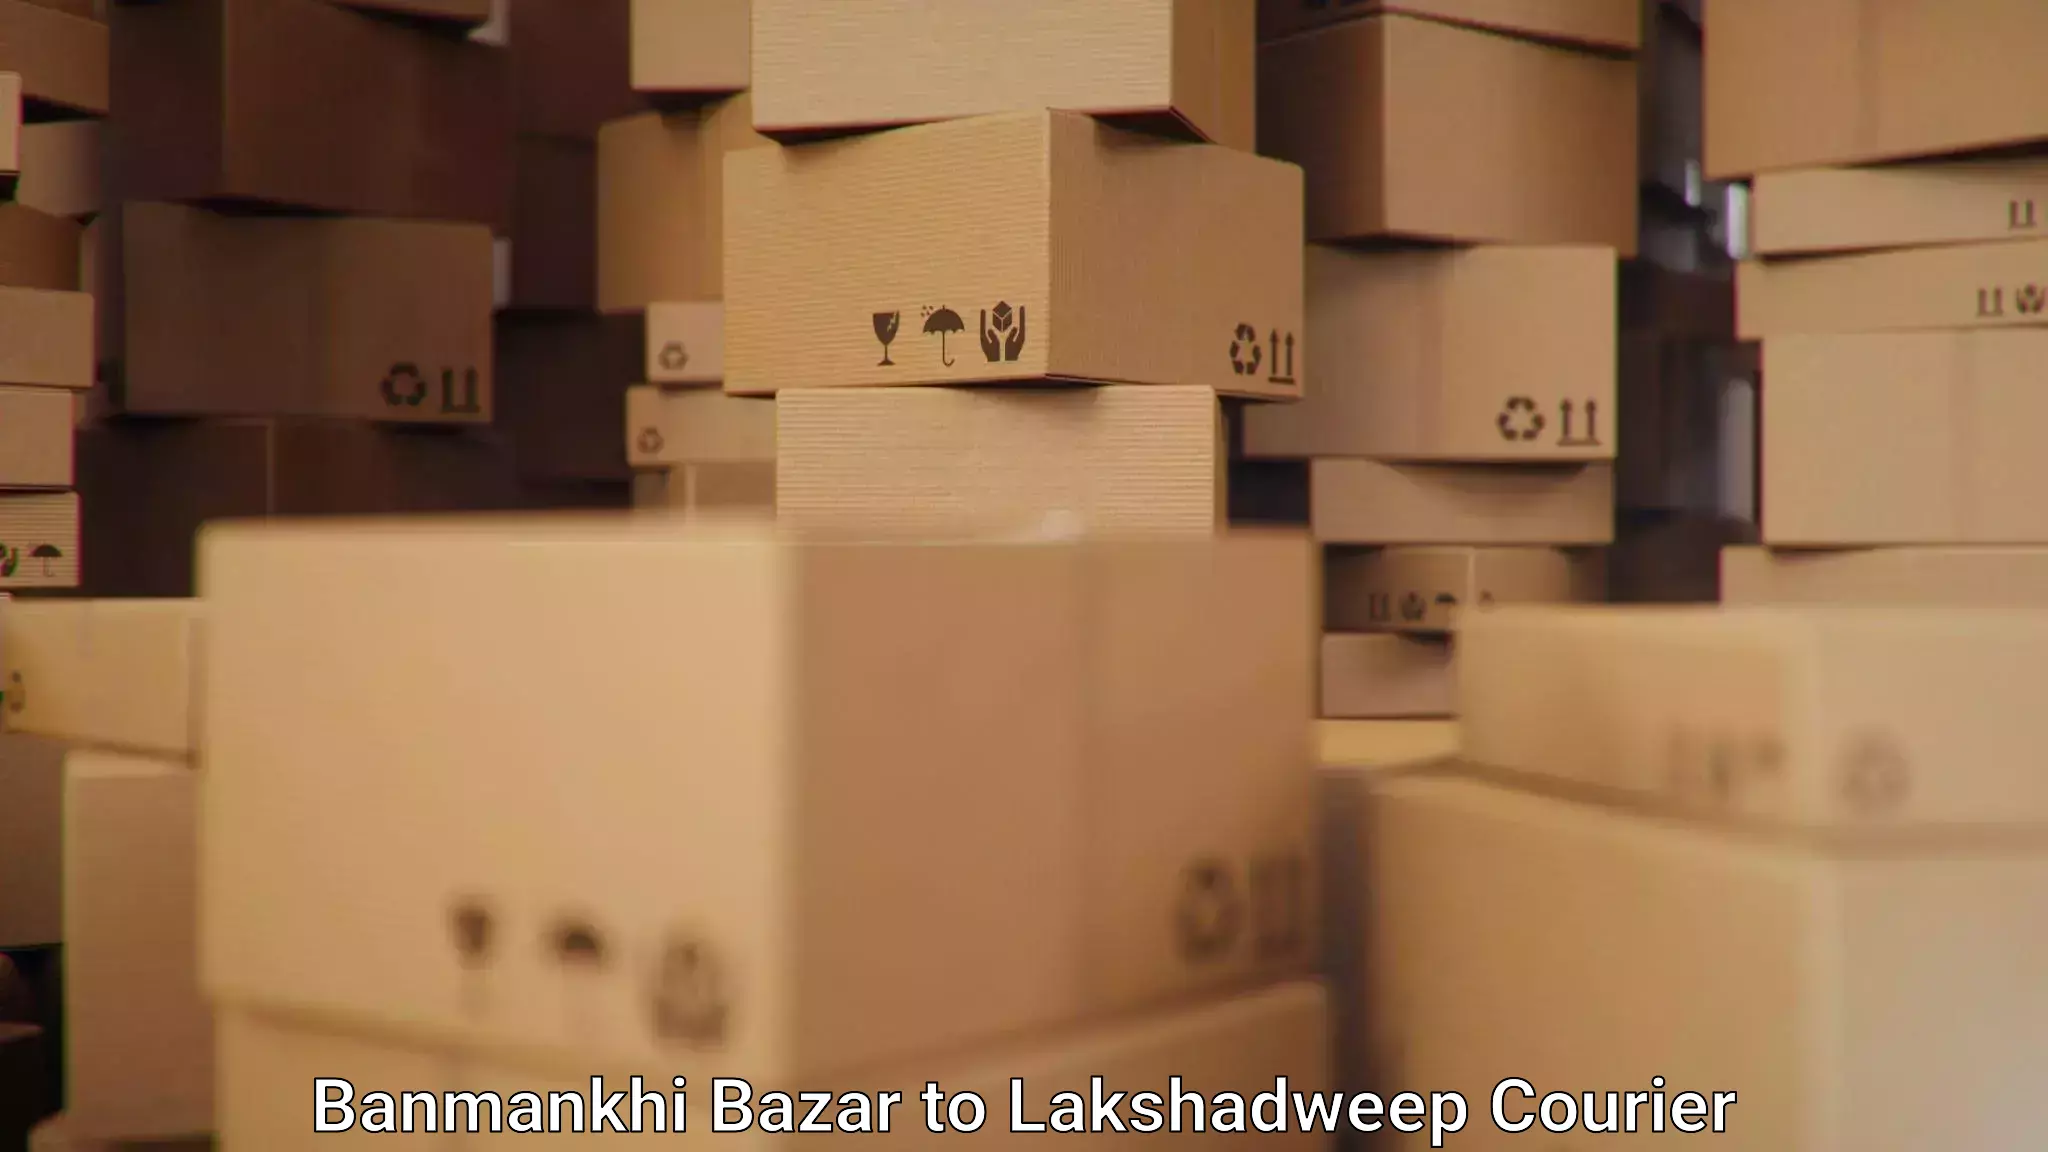 Long distance courier Banmankhi Bazar to Lakshadweep